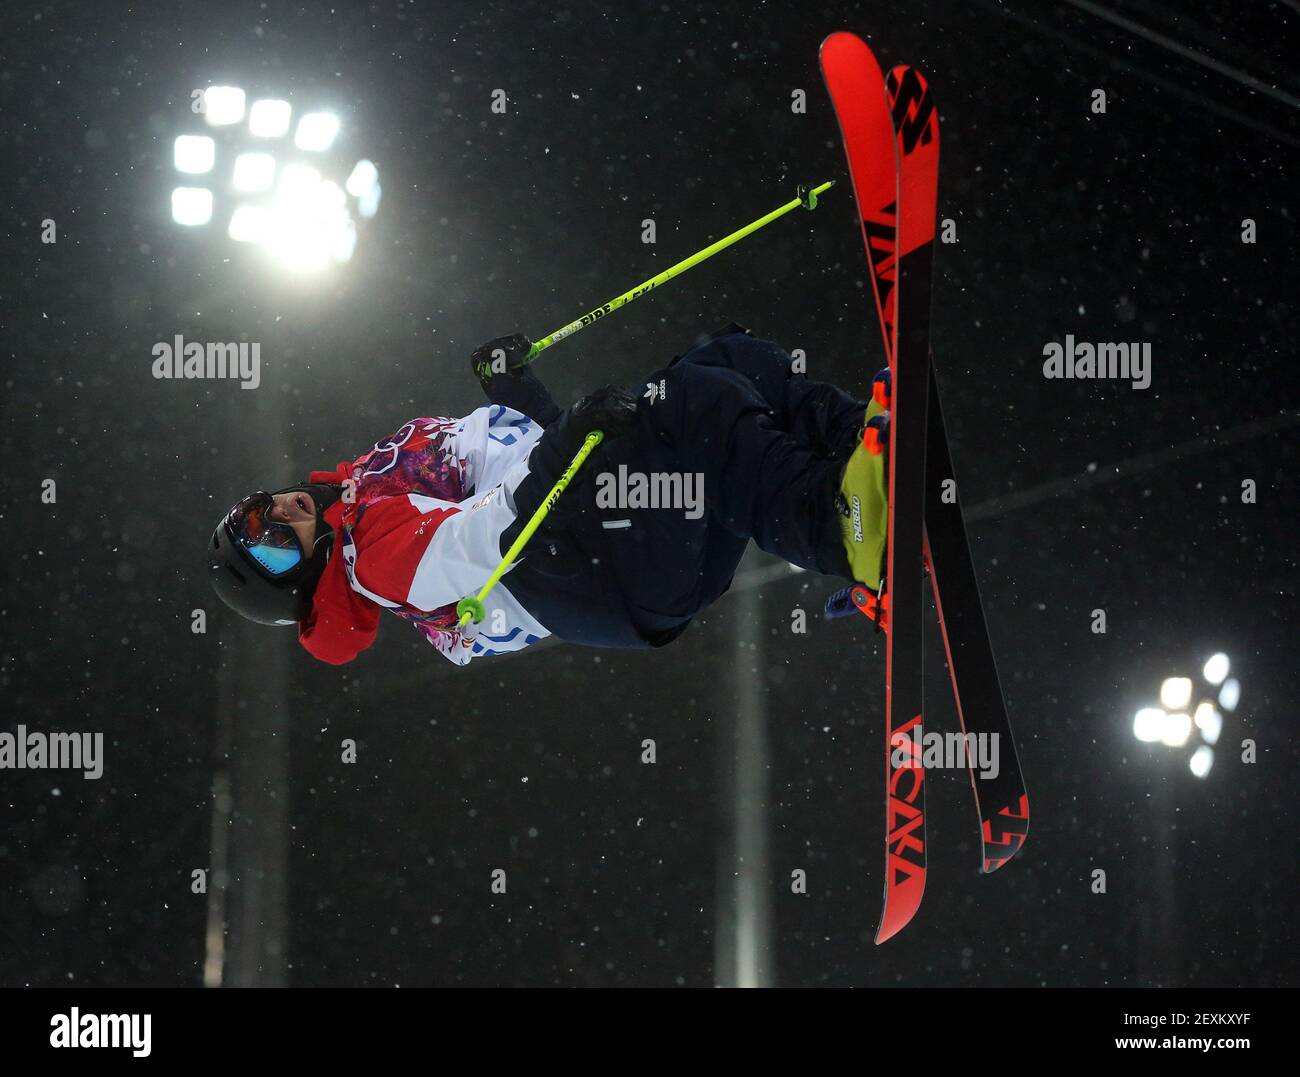 Murray Buchan of Great Britain competes in qualifying for the men's ski halfpipe at Rosa Khutor Extreme Park during the Winter Olympics in Sochi, Russia, Tuesday, Feb. 18, 2014. (Photo by Brian Cassella/Chicago Tribune/MCT/Sipa USA) Stock Photo